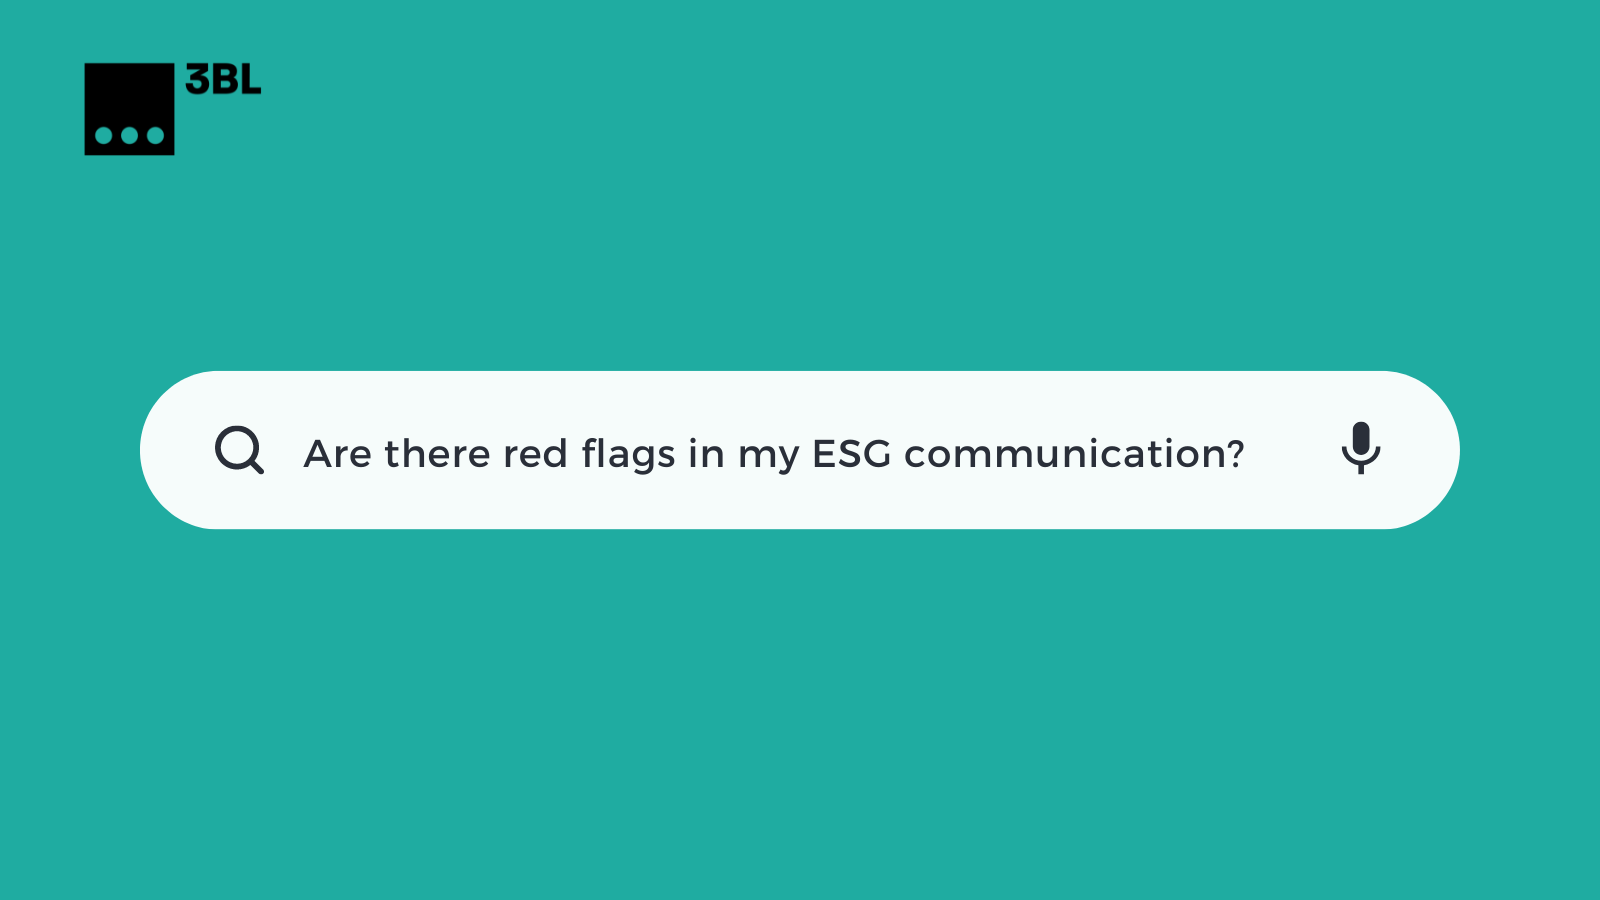 "Are there red flags in ESG communications?"